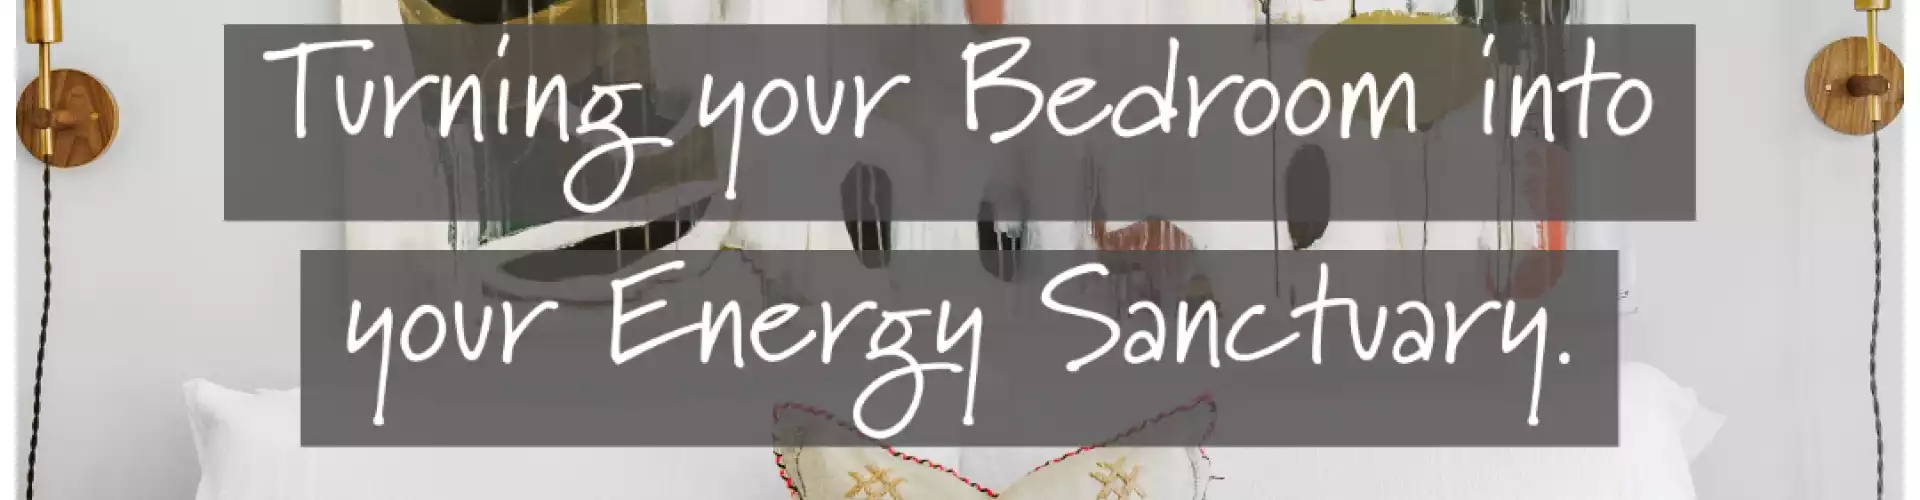 Turn your Bedroom into your Energy Sanctuary